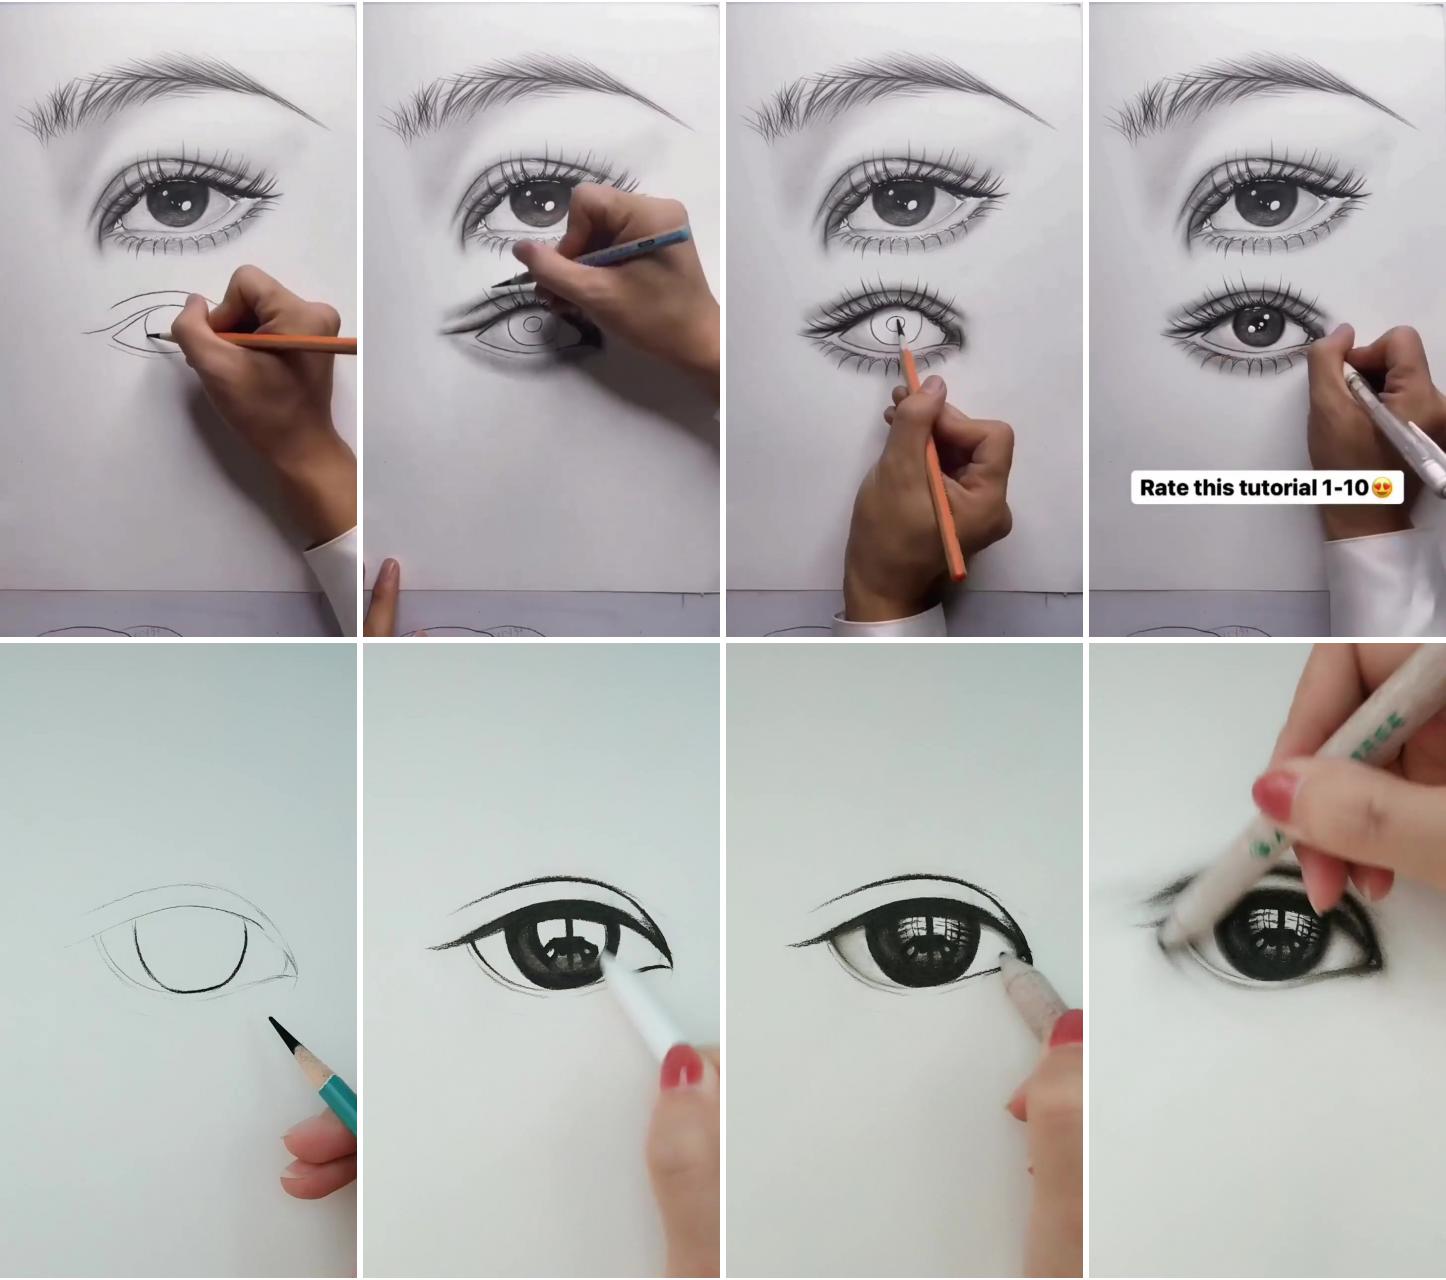 How to draw an eye | you can draw in 30 days hyper realistic drawings